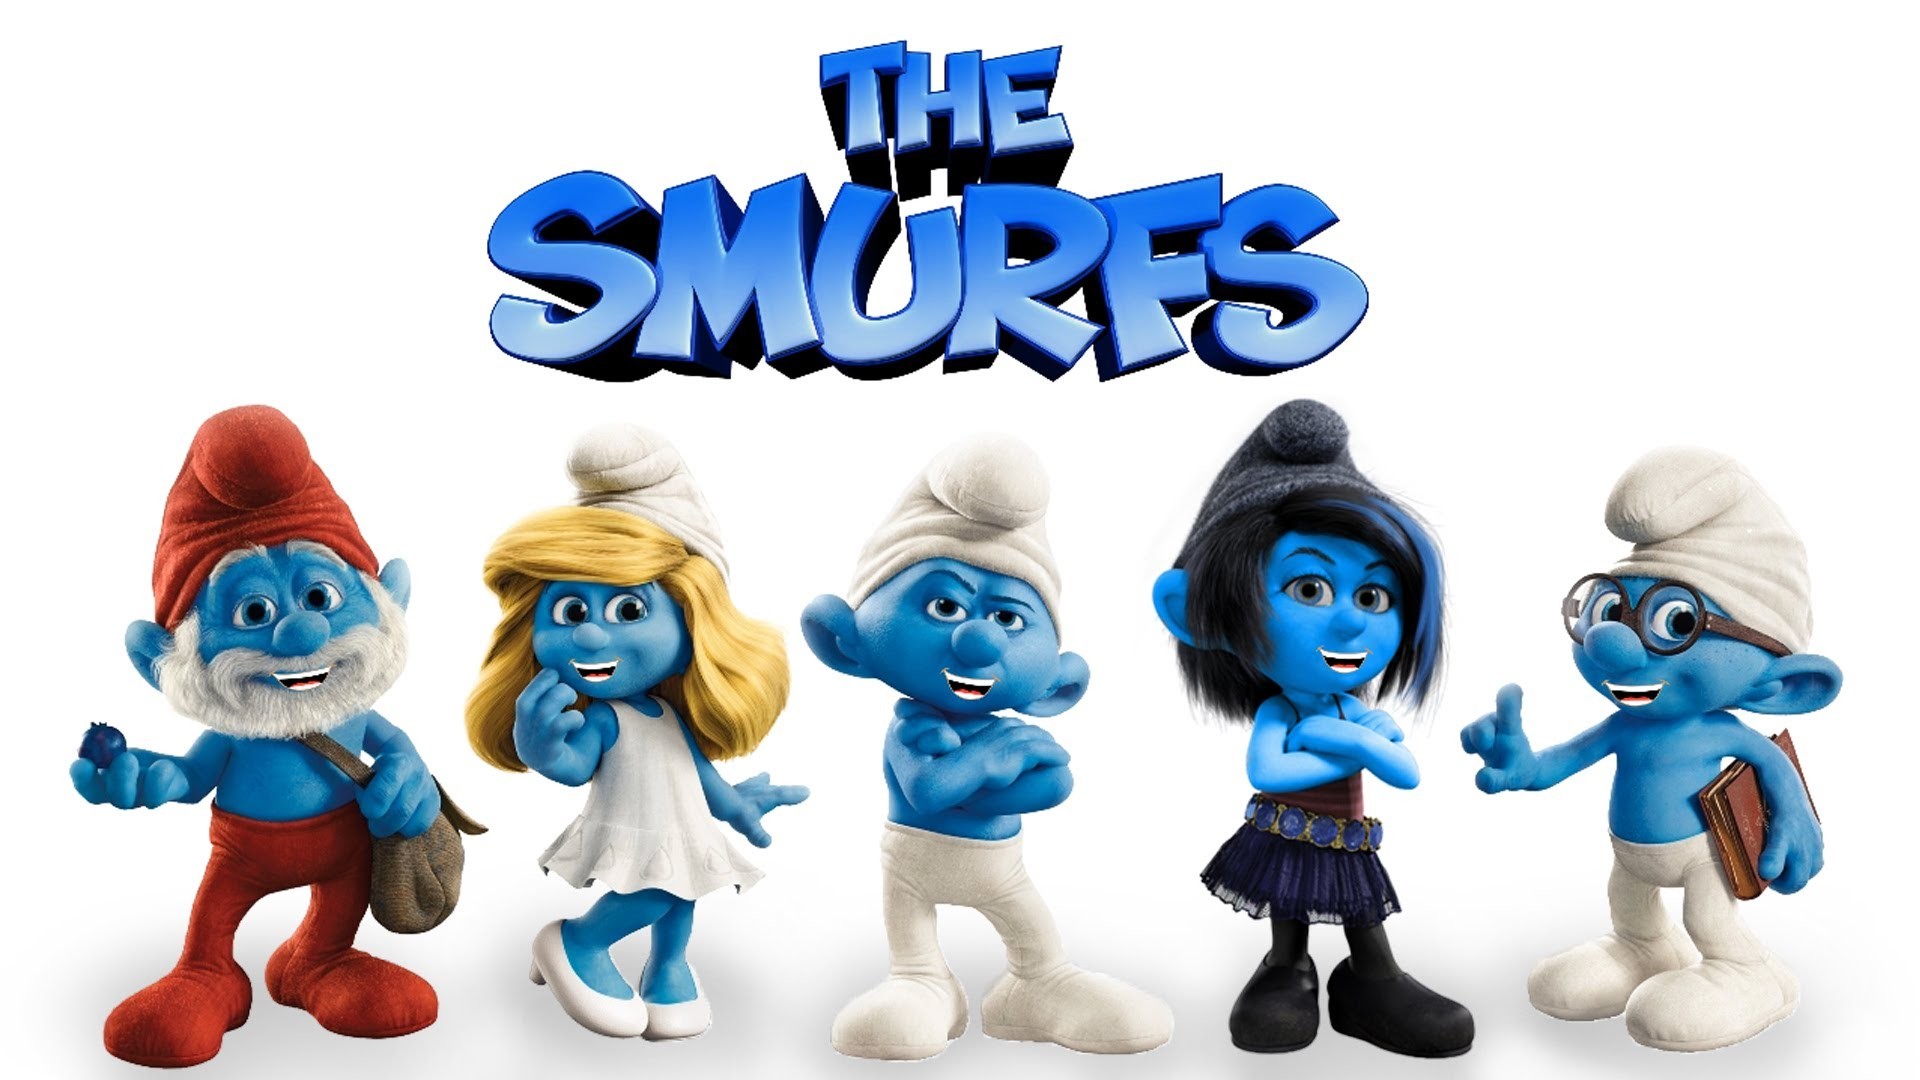 1920x1080 The Smurfs Finger Family Candy Kids Nursery Rhymes & Songs .